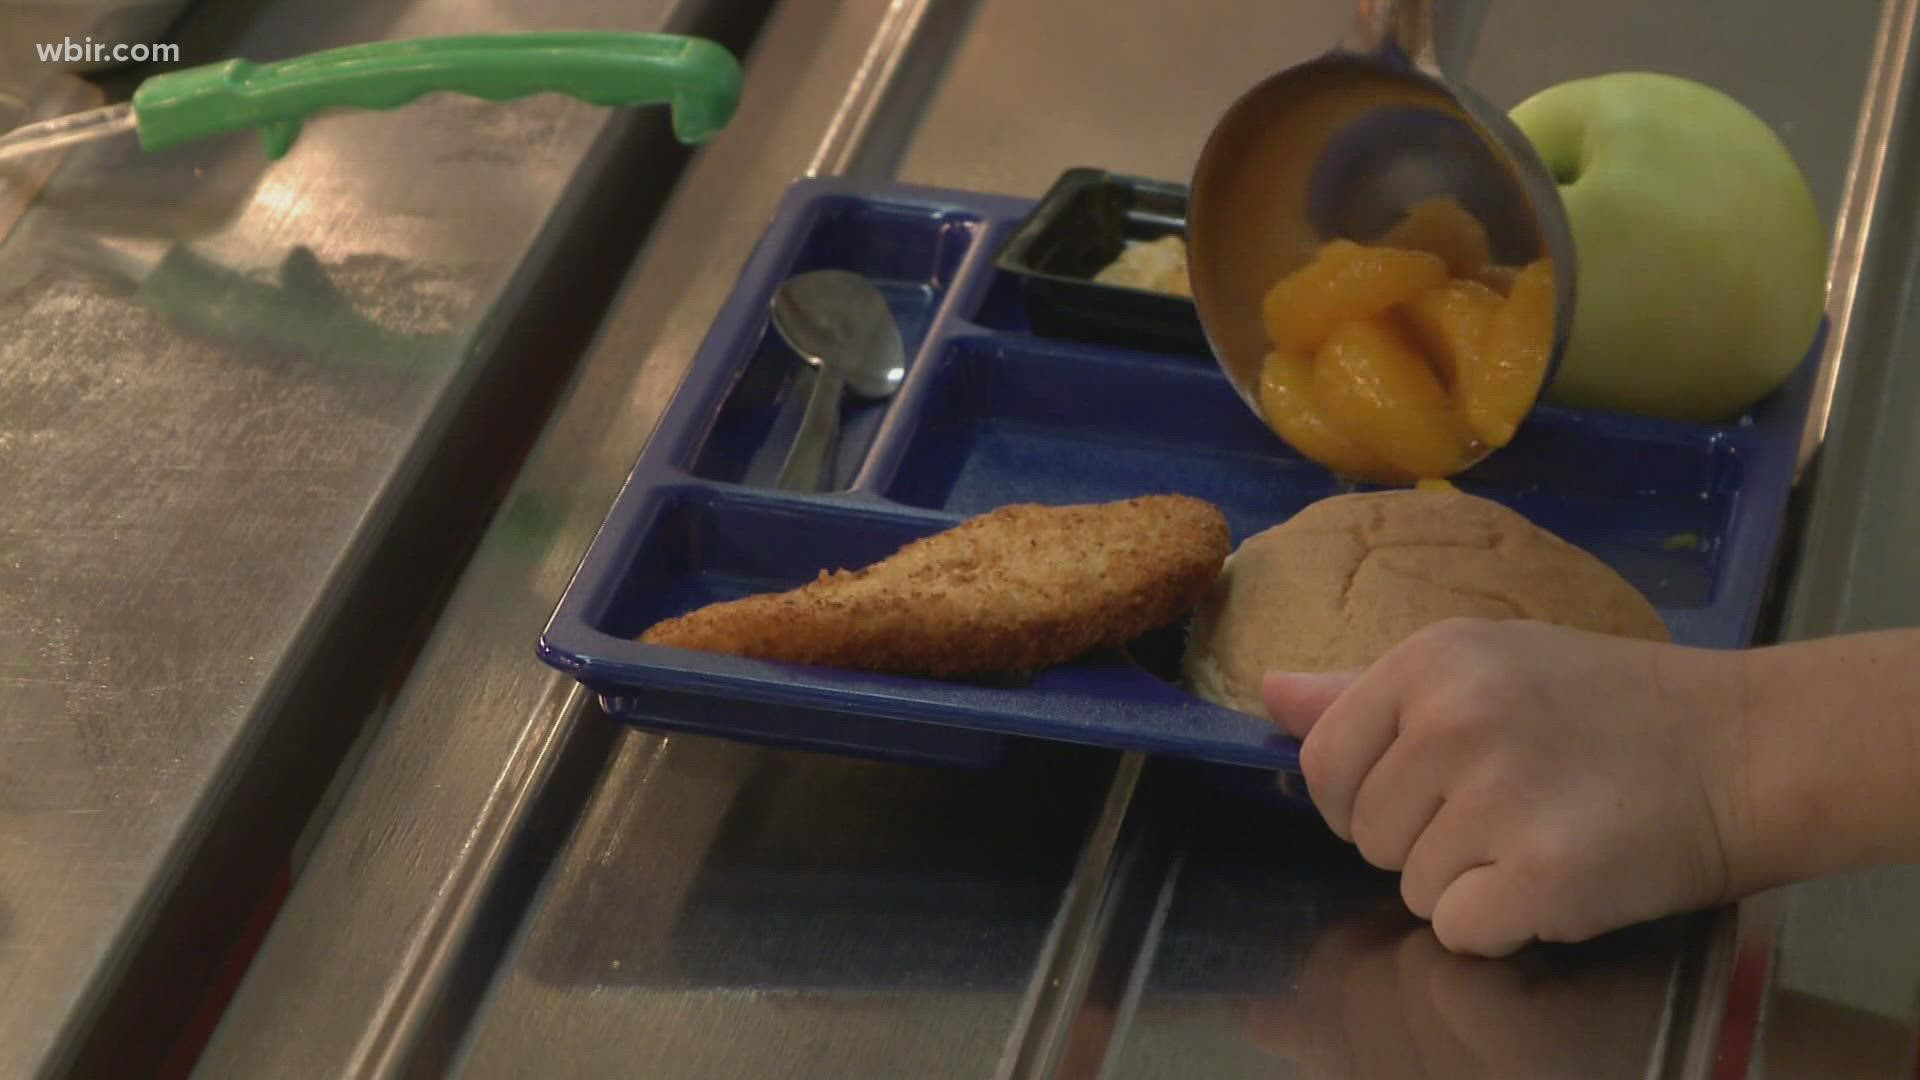 The school district said the decision was beyond their control, saying a program expires next school year that let it serve free breakfast and lunch to students.